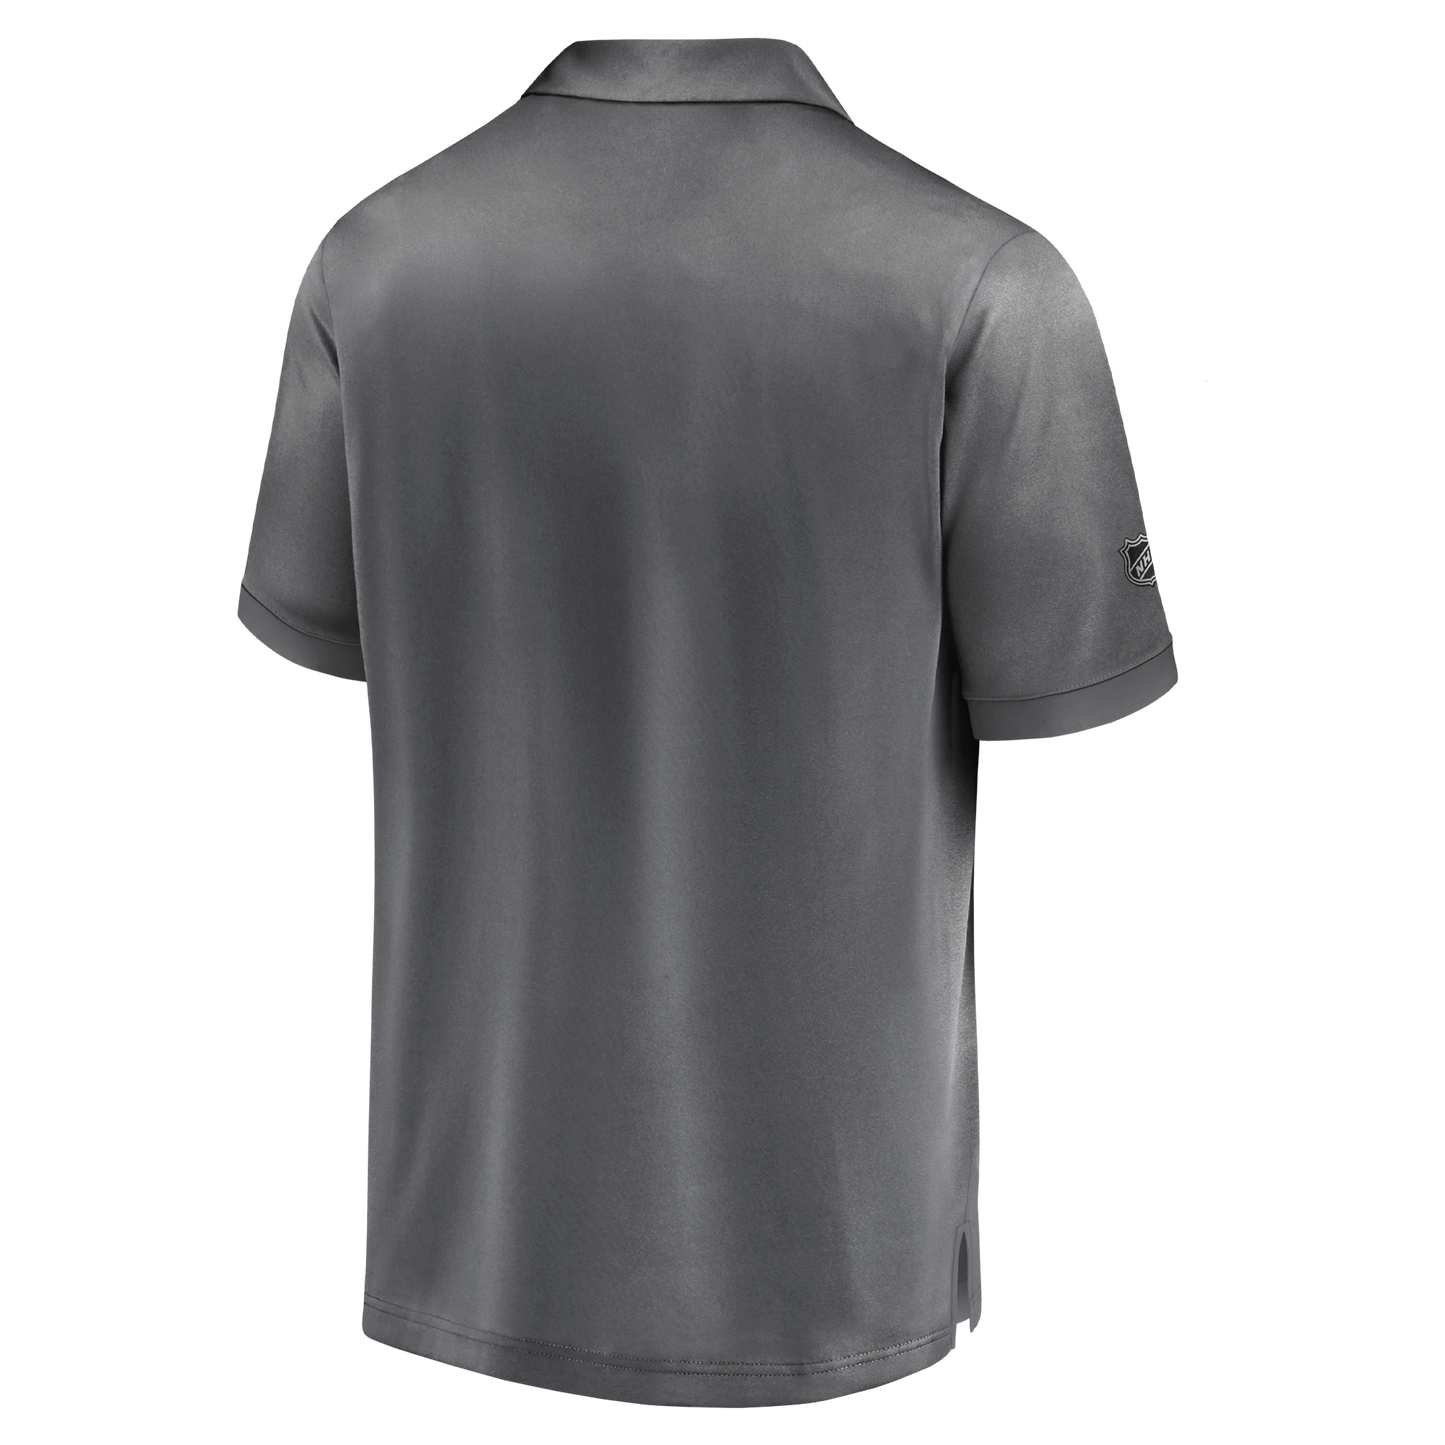 Back: Gray polo with NHL shield on right sleeve